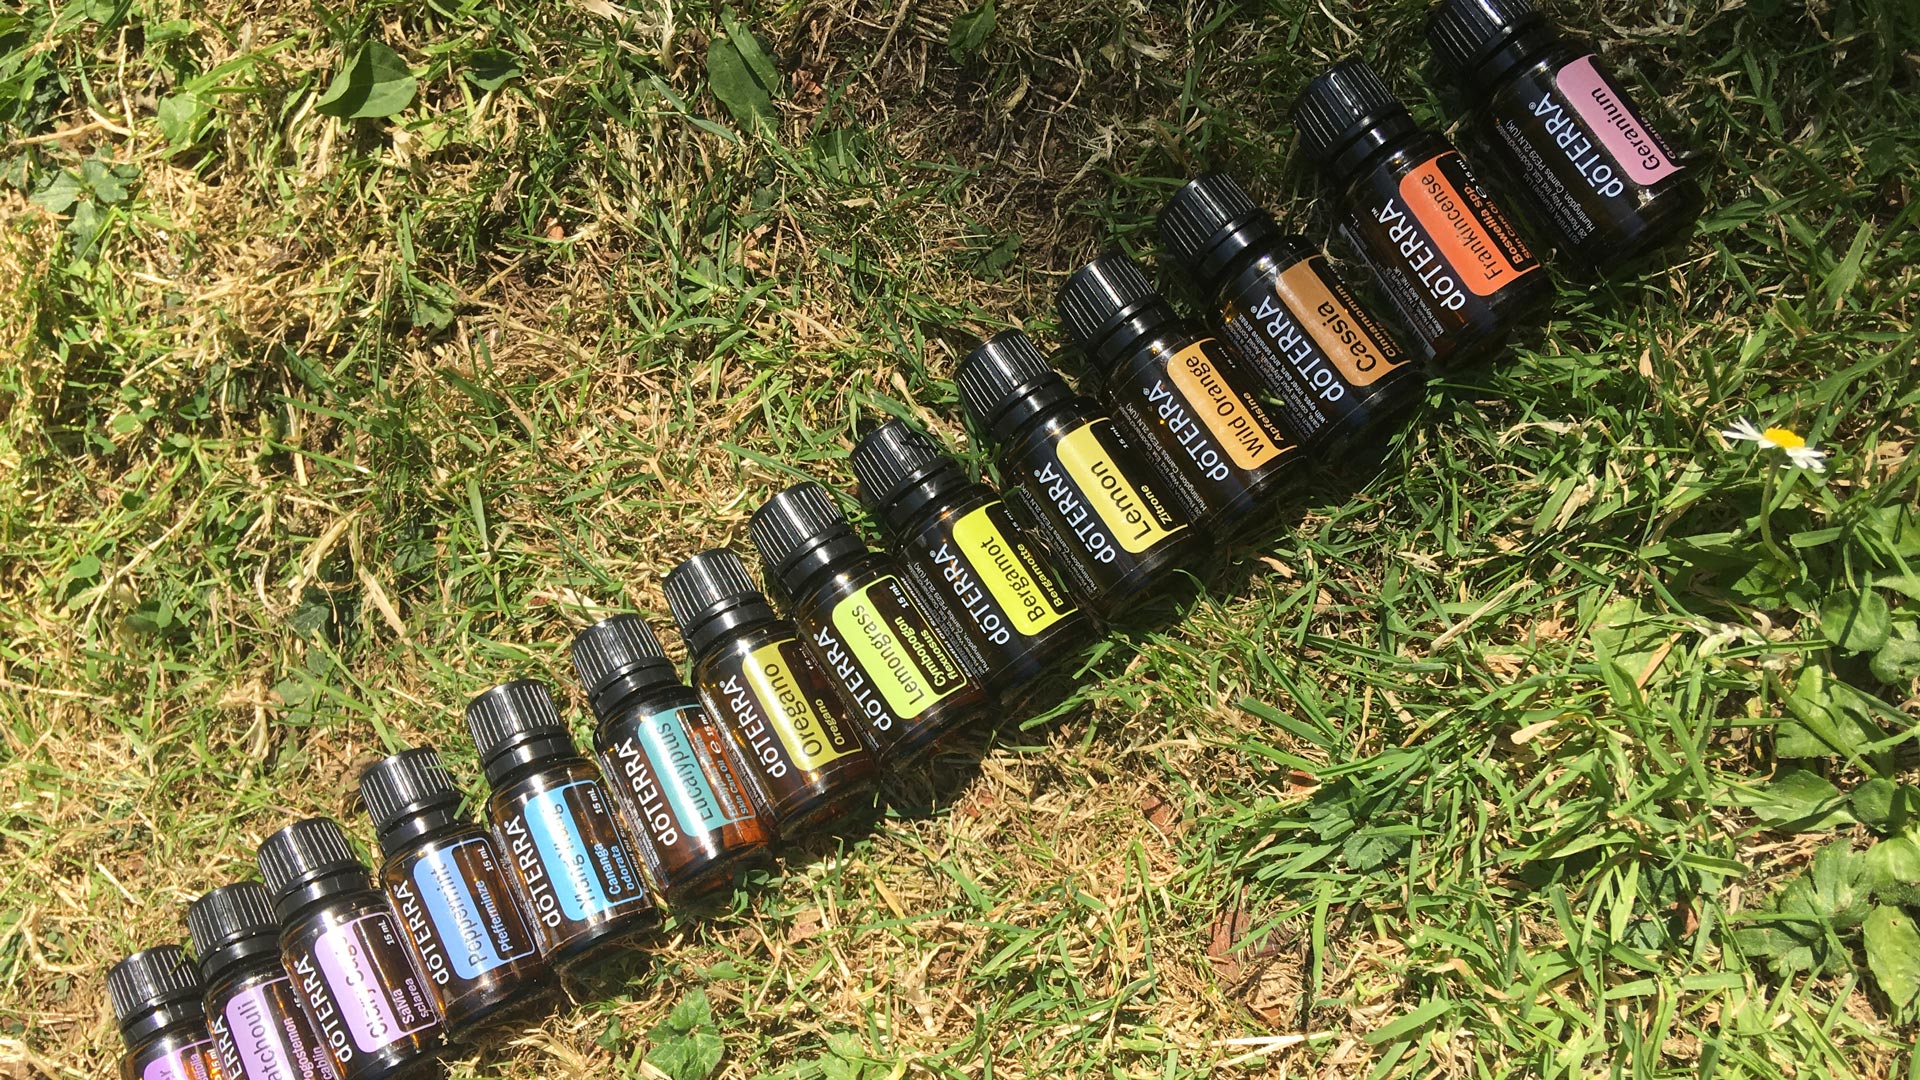 Some of the essential oils that i use